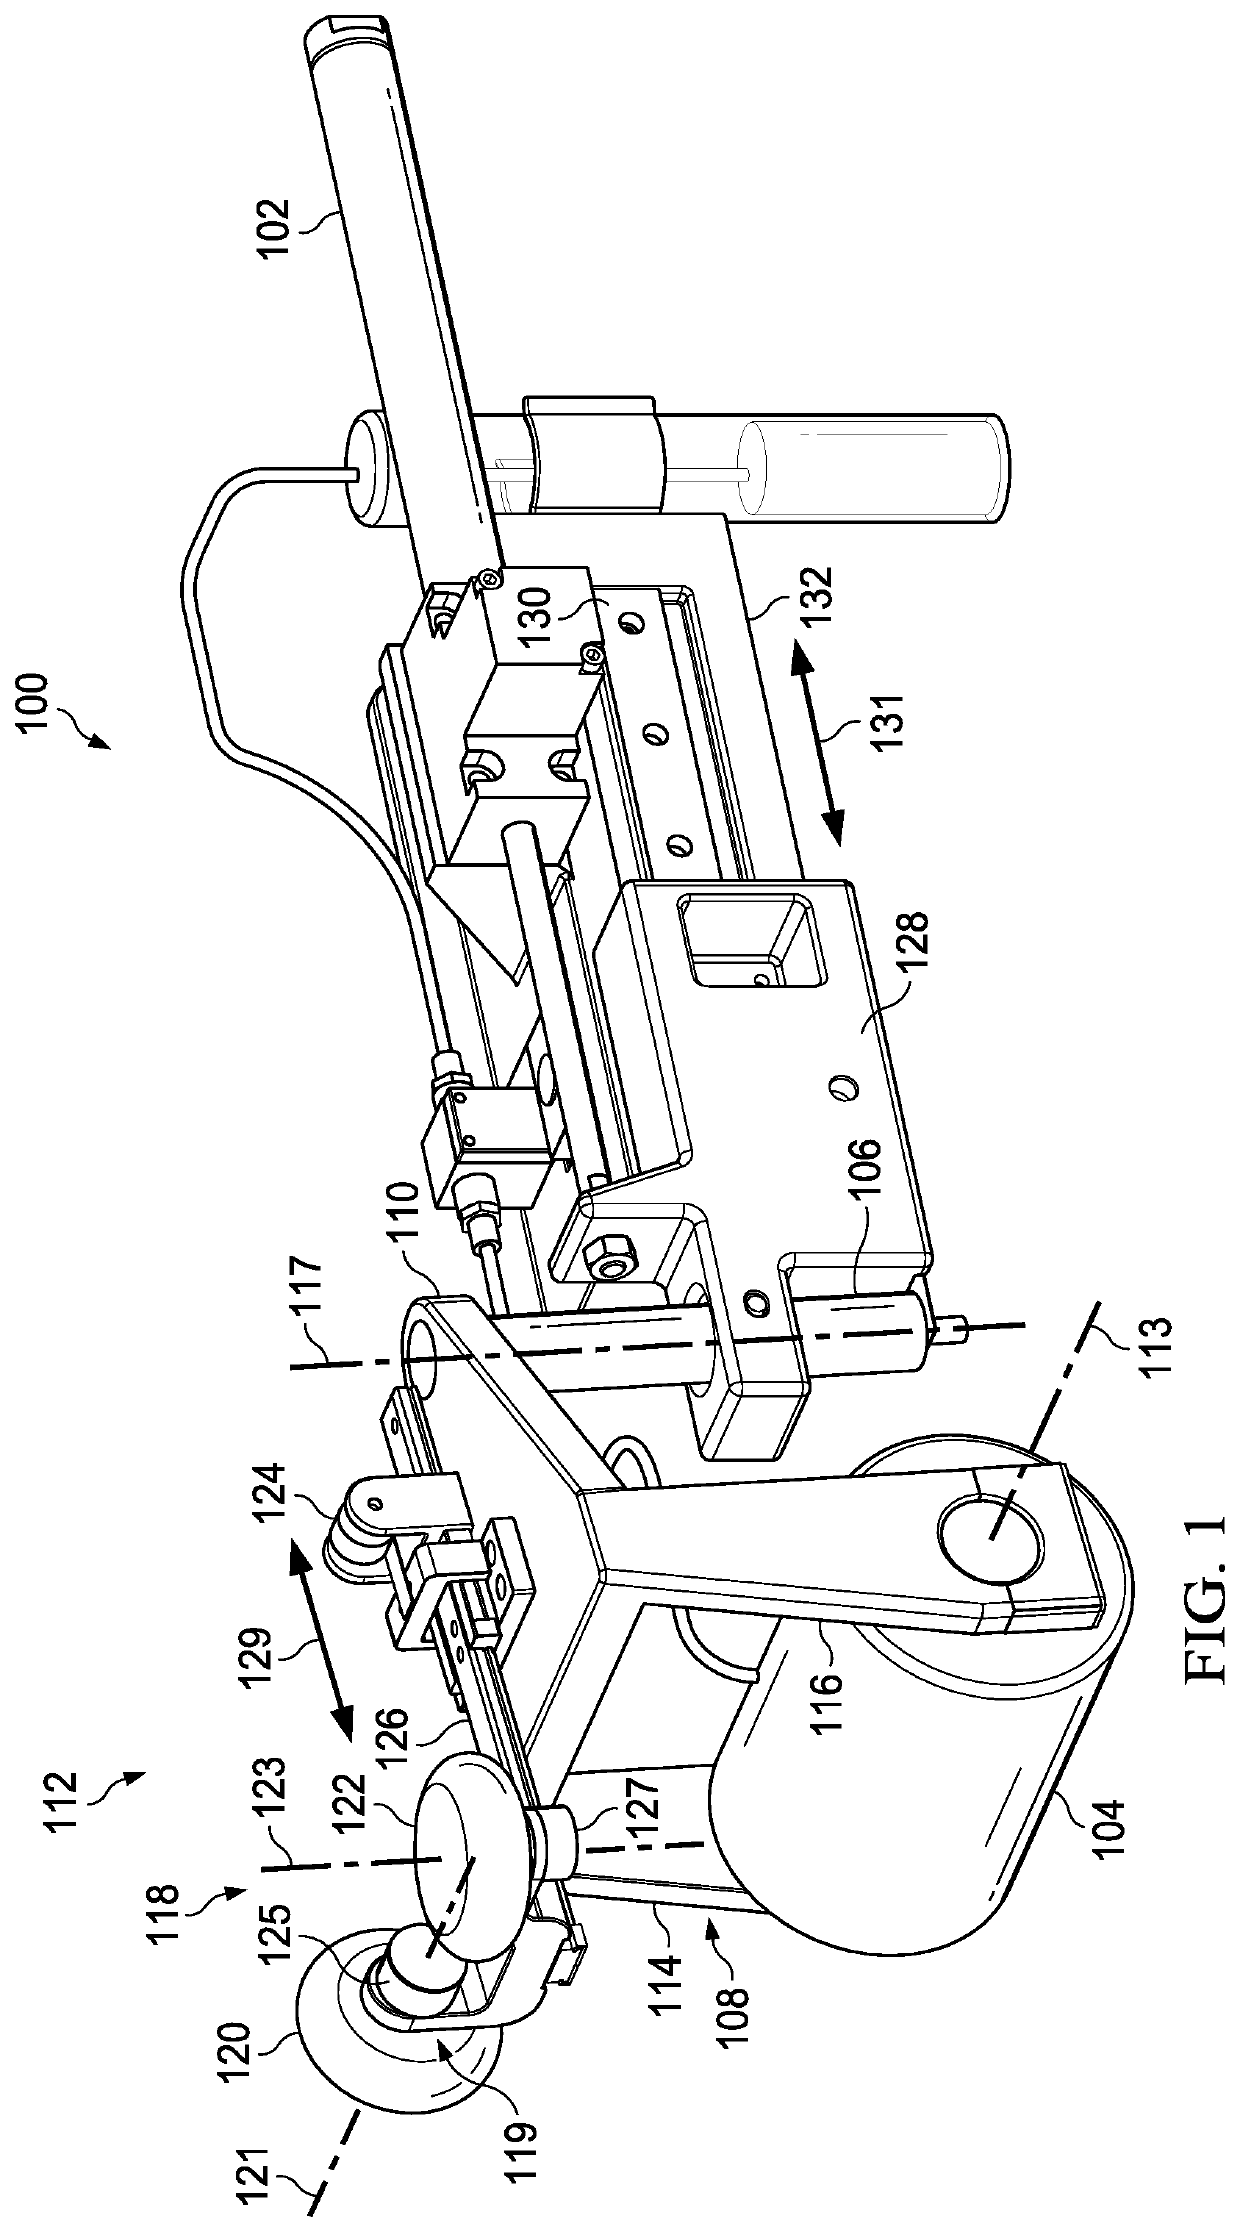 Robotic end effector system with surface tracking and methods for use